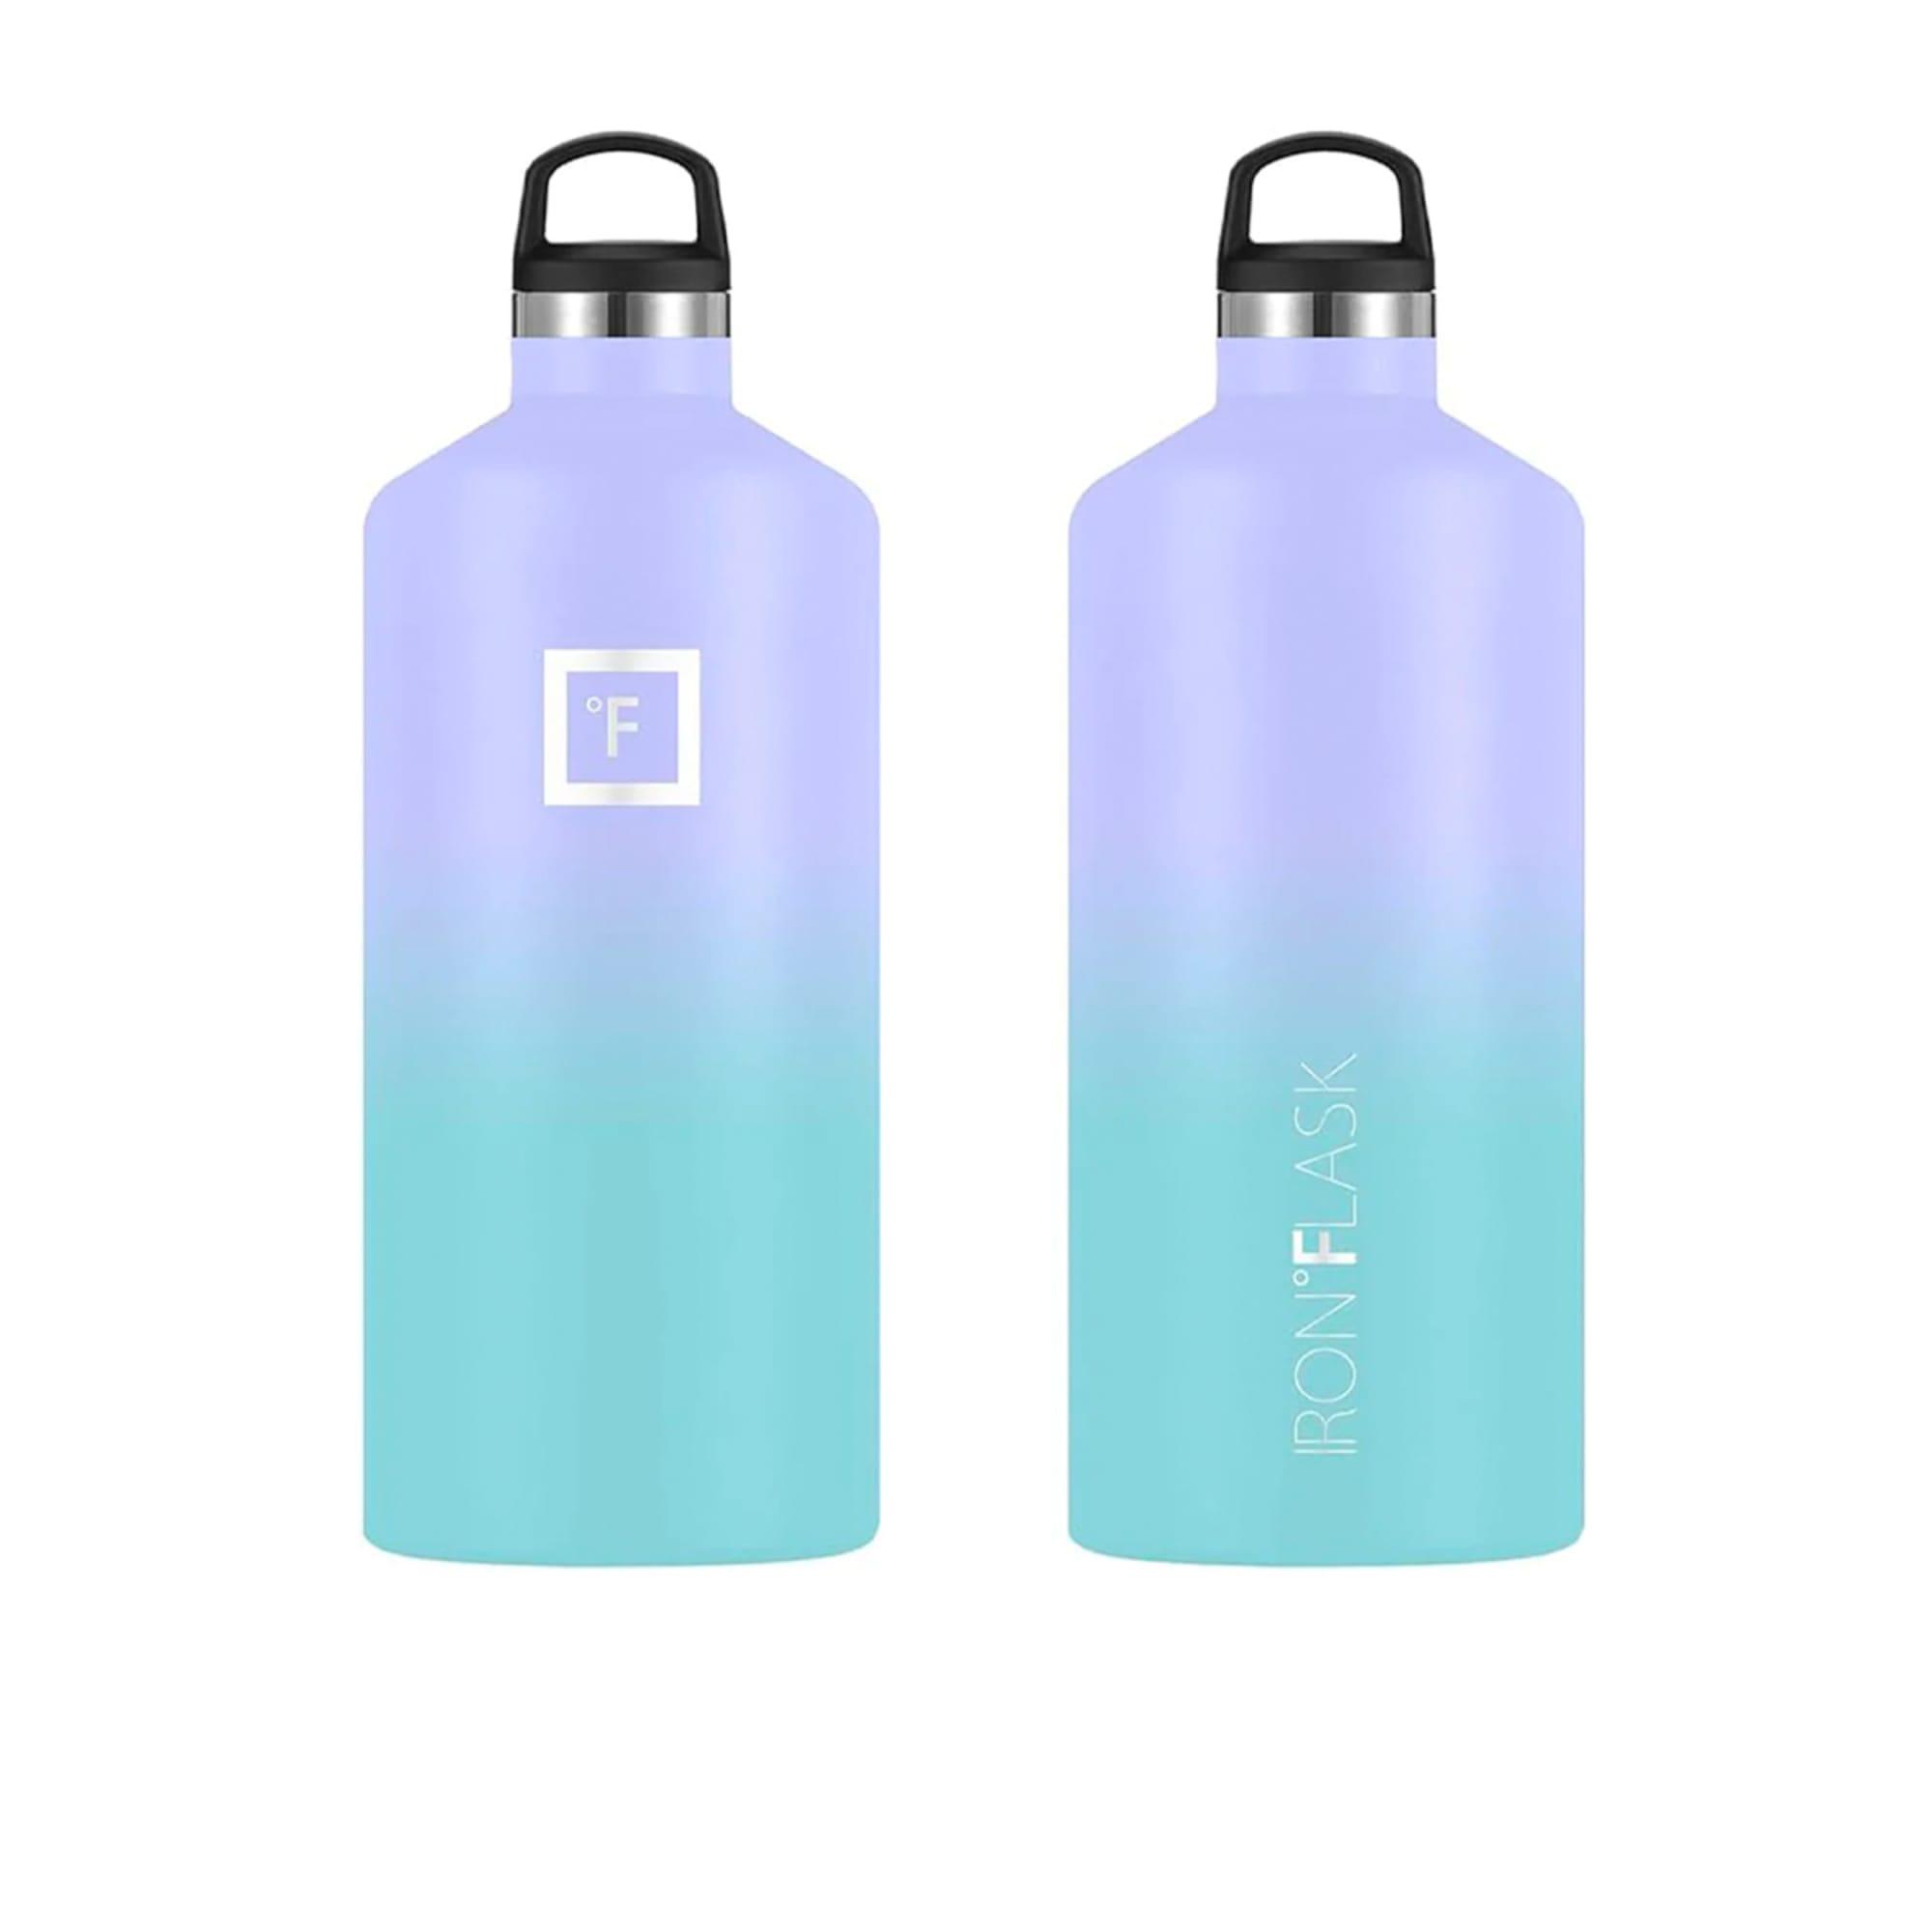 Iron Flask Narrow Mouth Bottle with Straw Lid 1.9L Cotton Candy Image 4